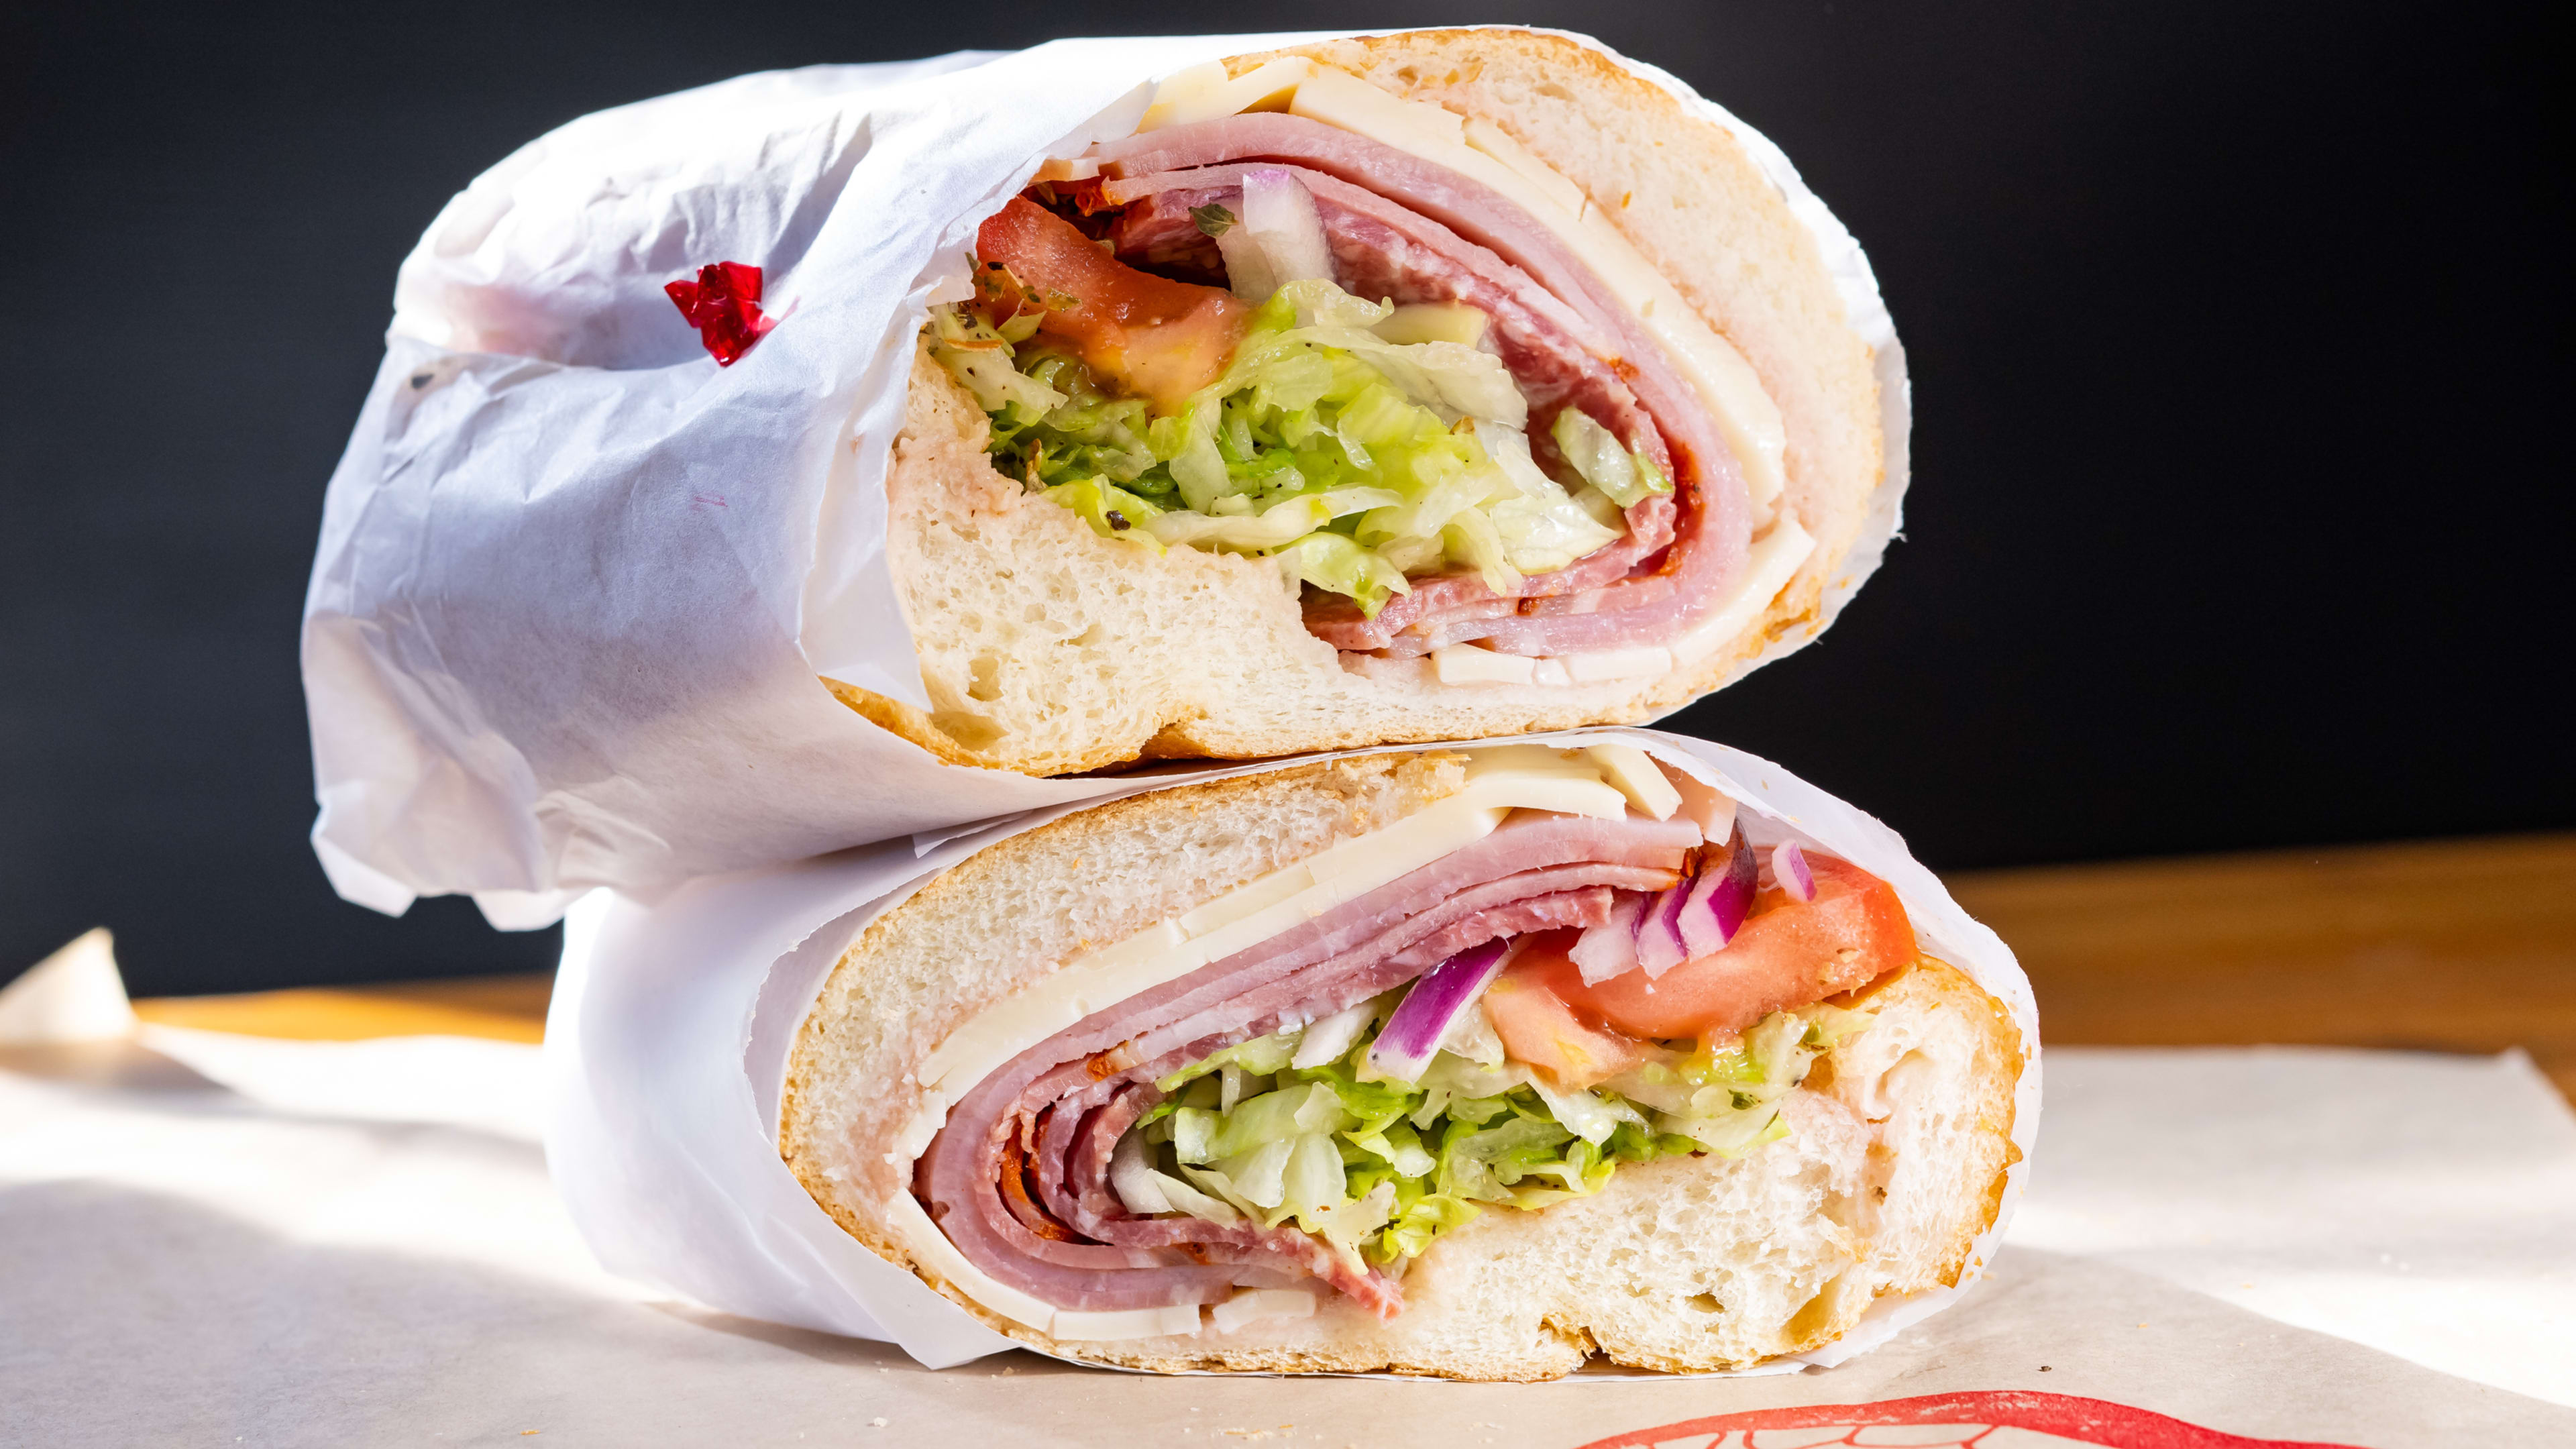 Italian sub with ham, cheese, lettuce, and tomatoes